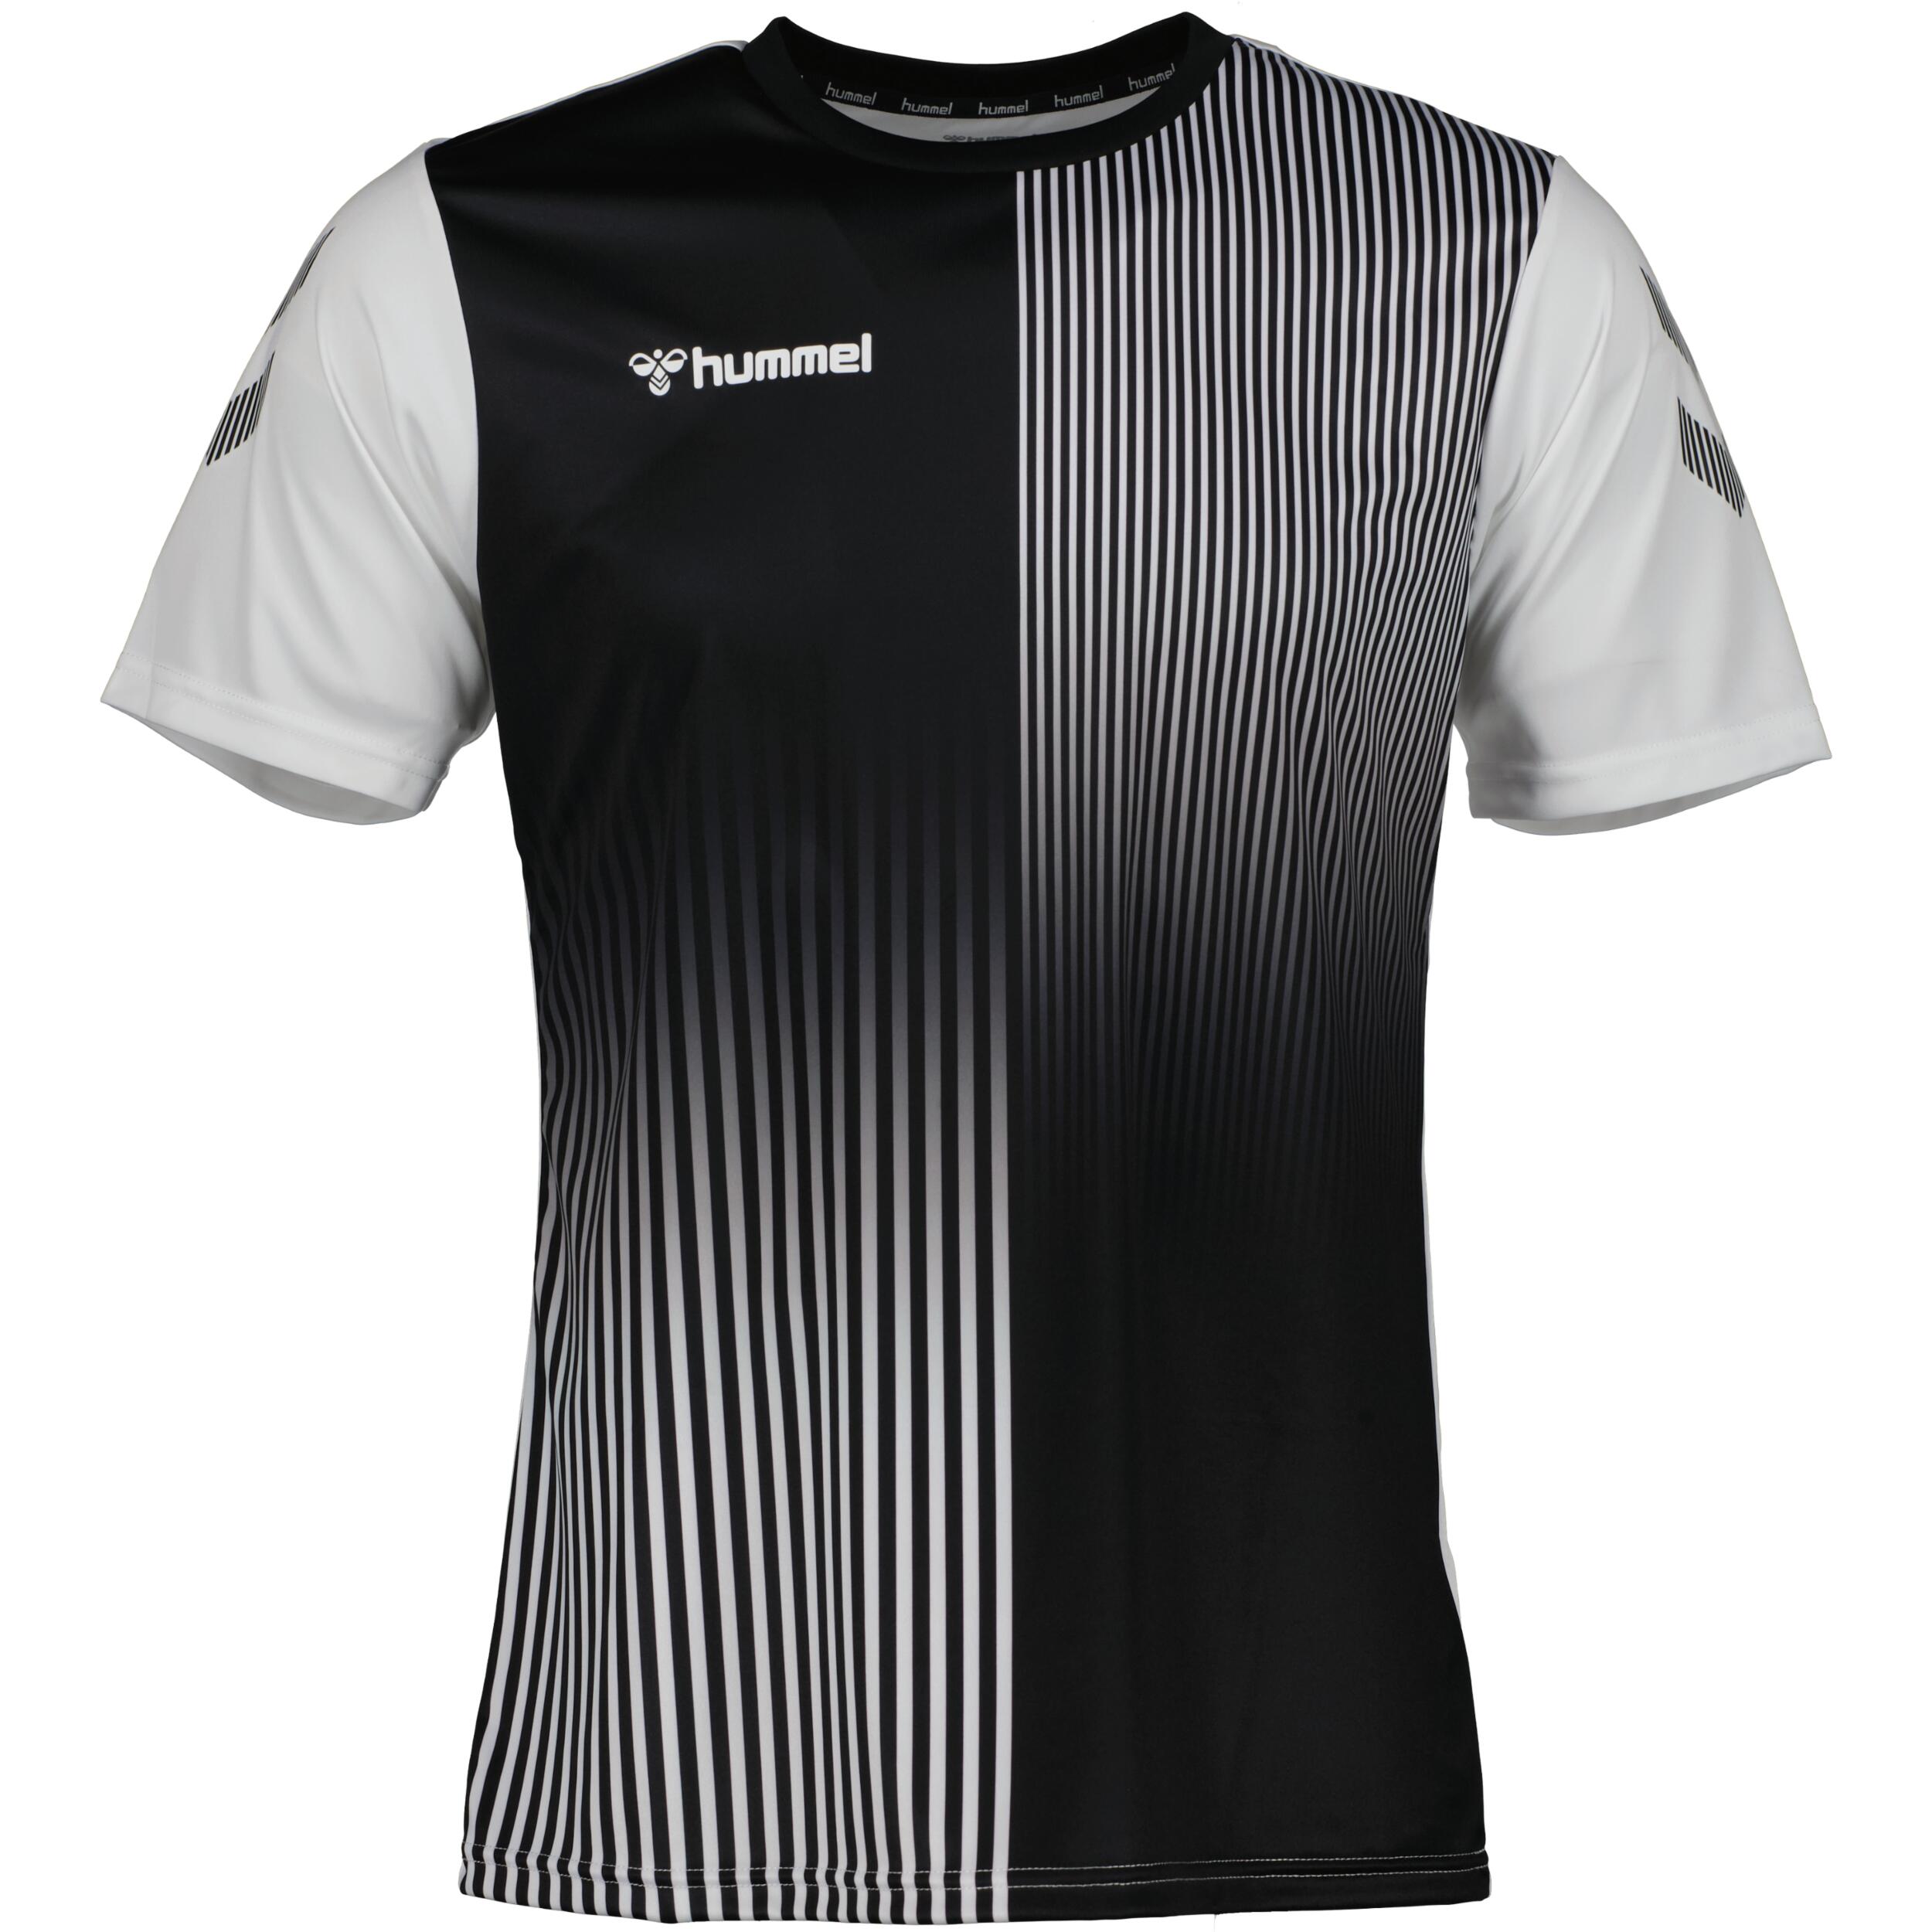 HUMMEL Mexico jersey for kids, great for football, in black/white